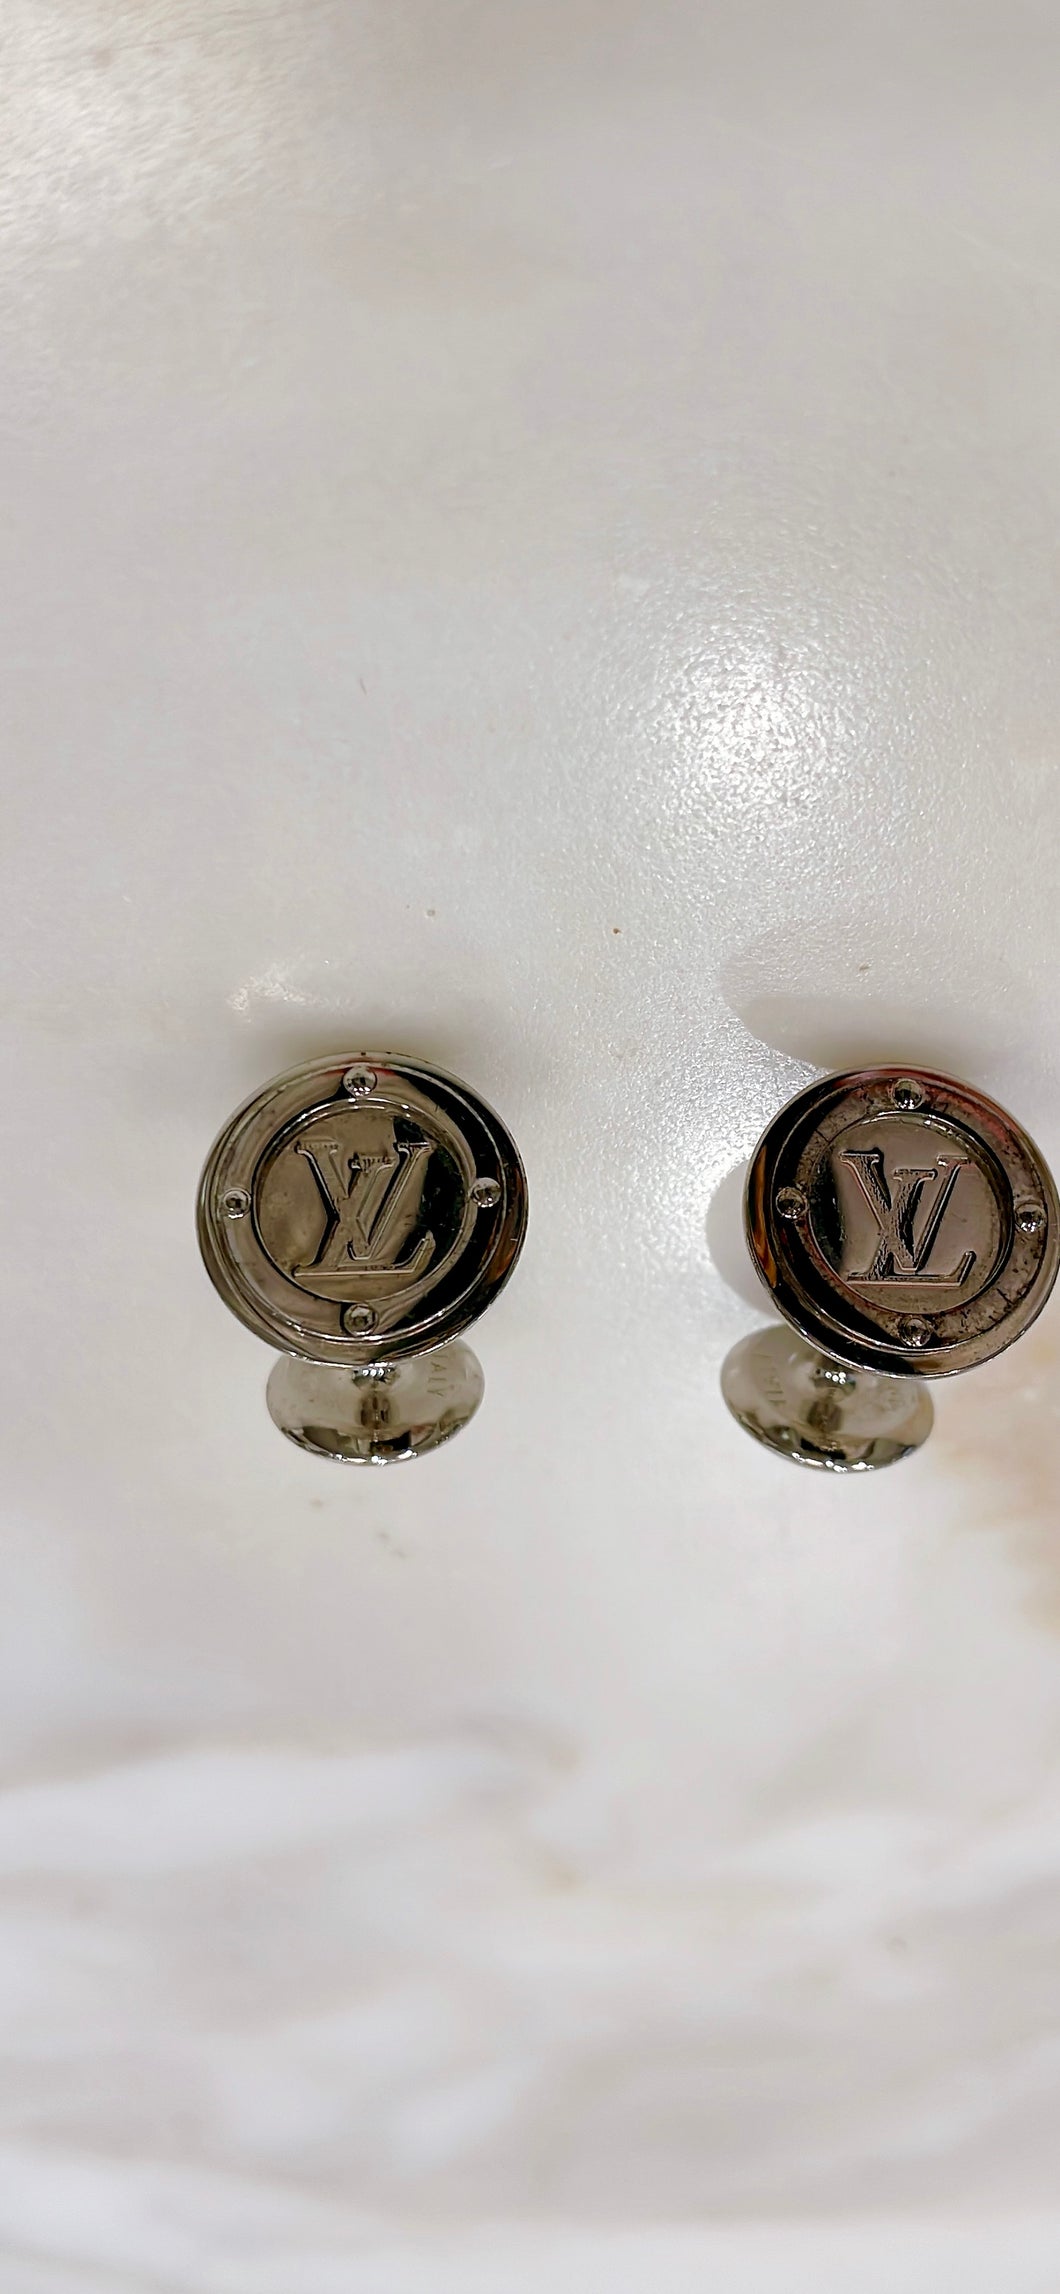 Preowned Louis Vuitton Cuff Links